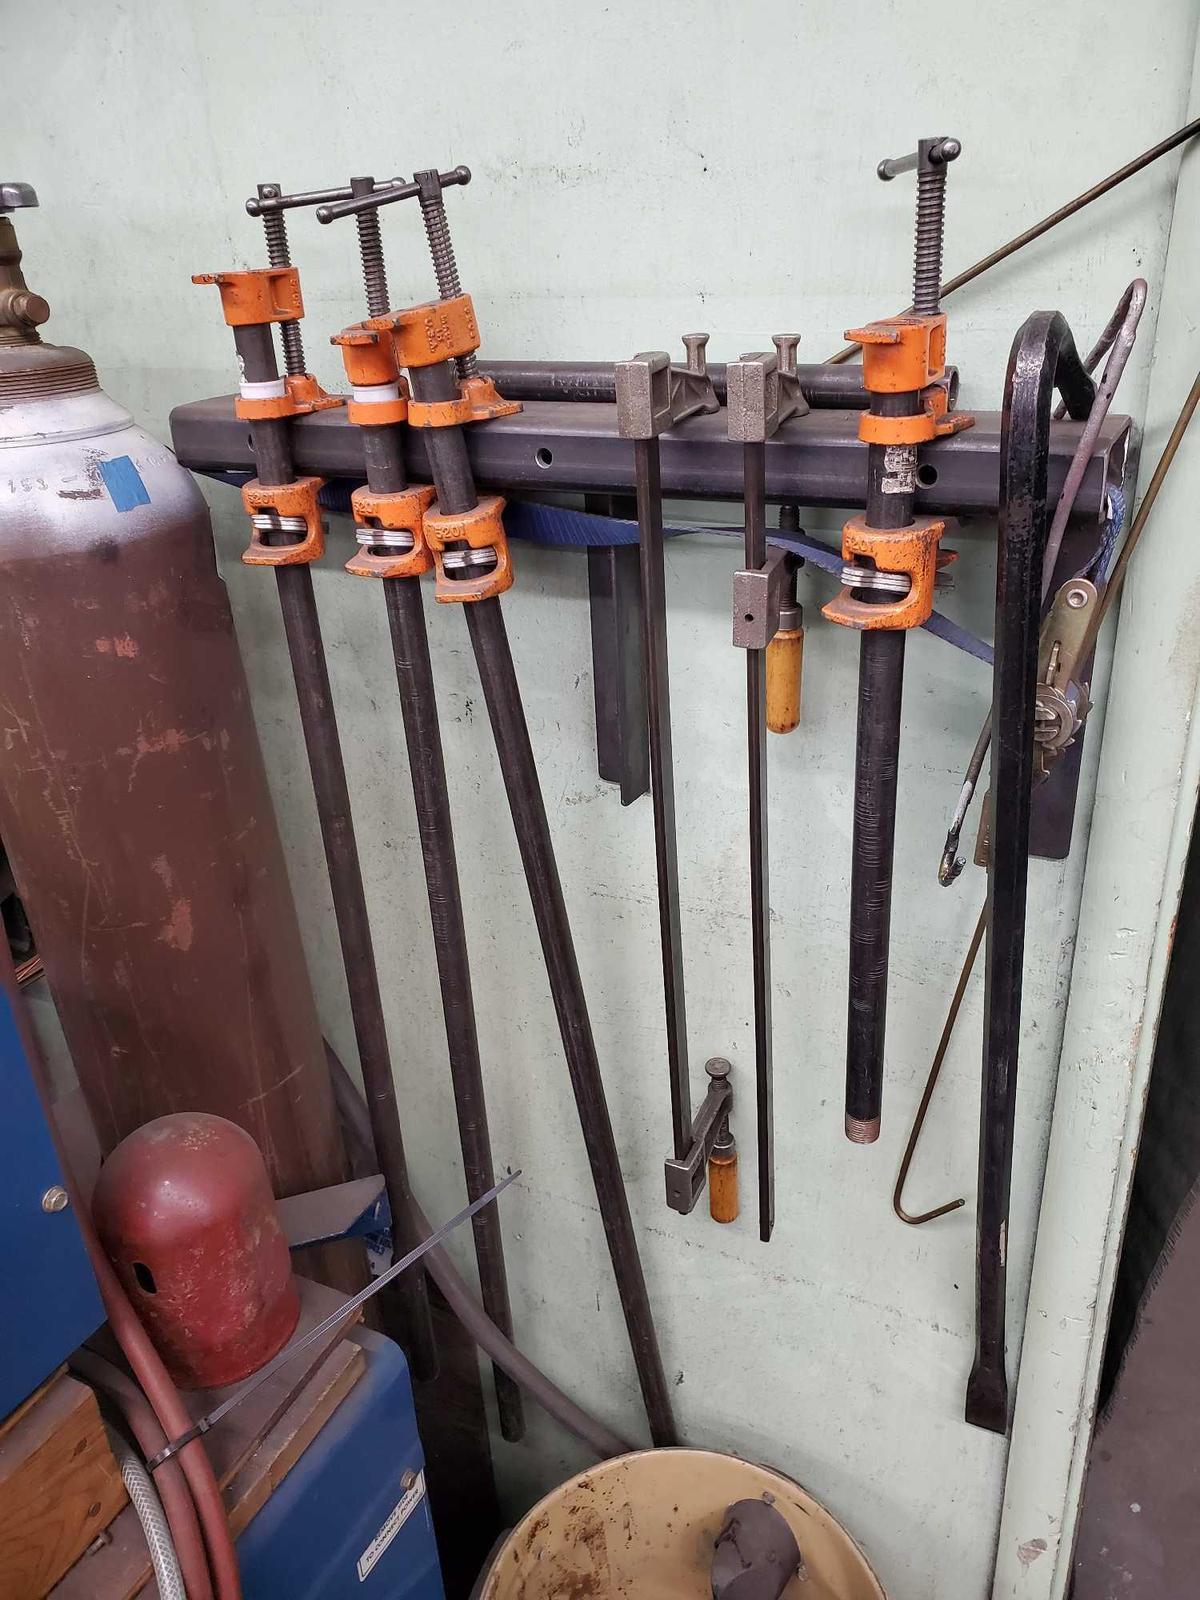 PONY CLAMPS, B&C CLAMPS AND PRY BAR